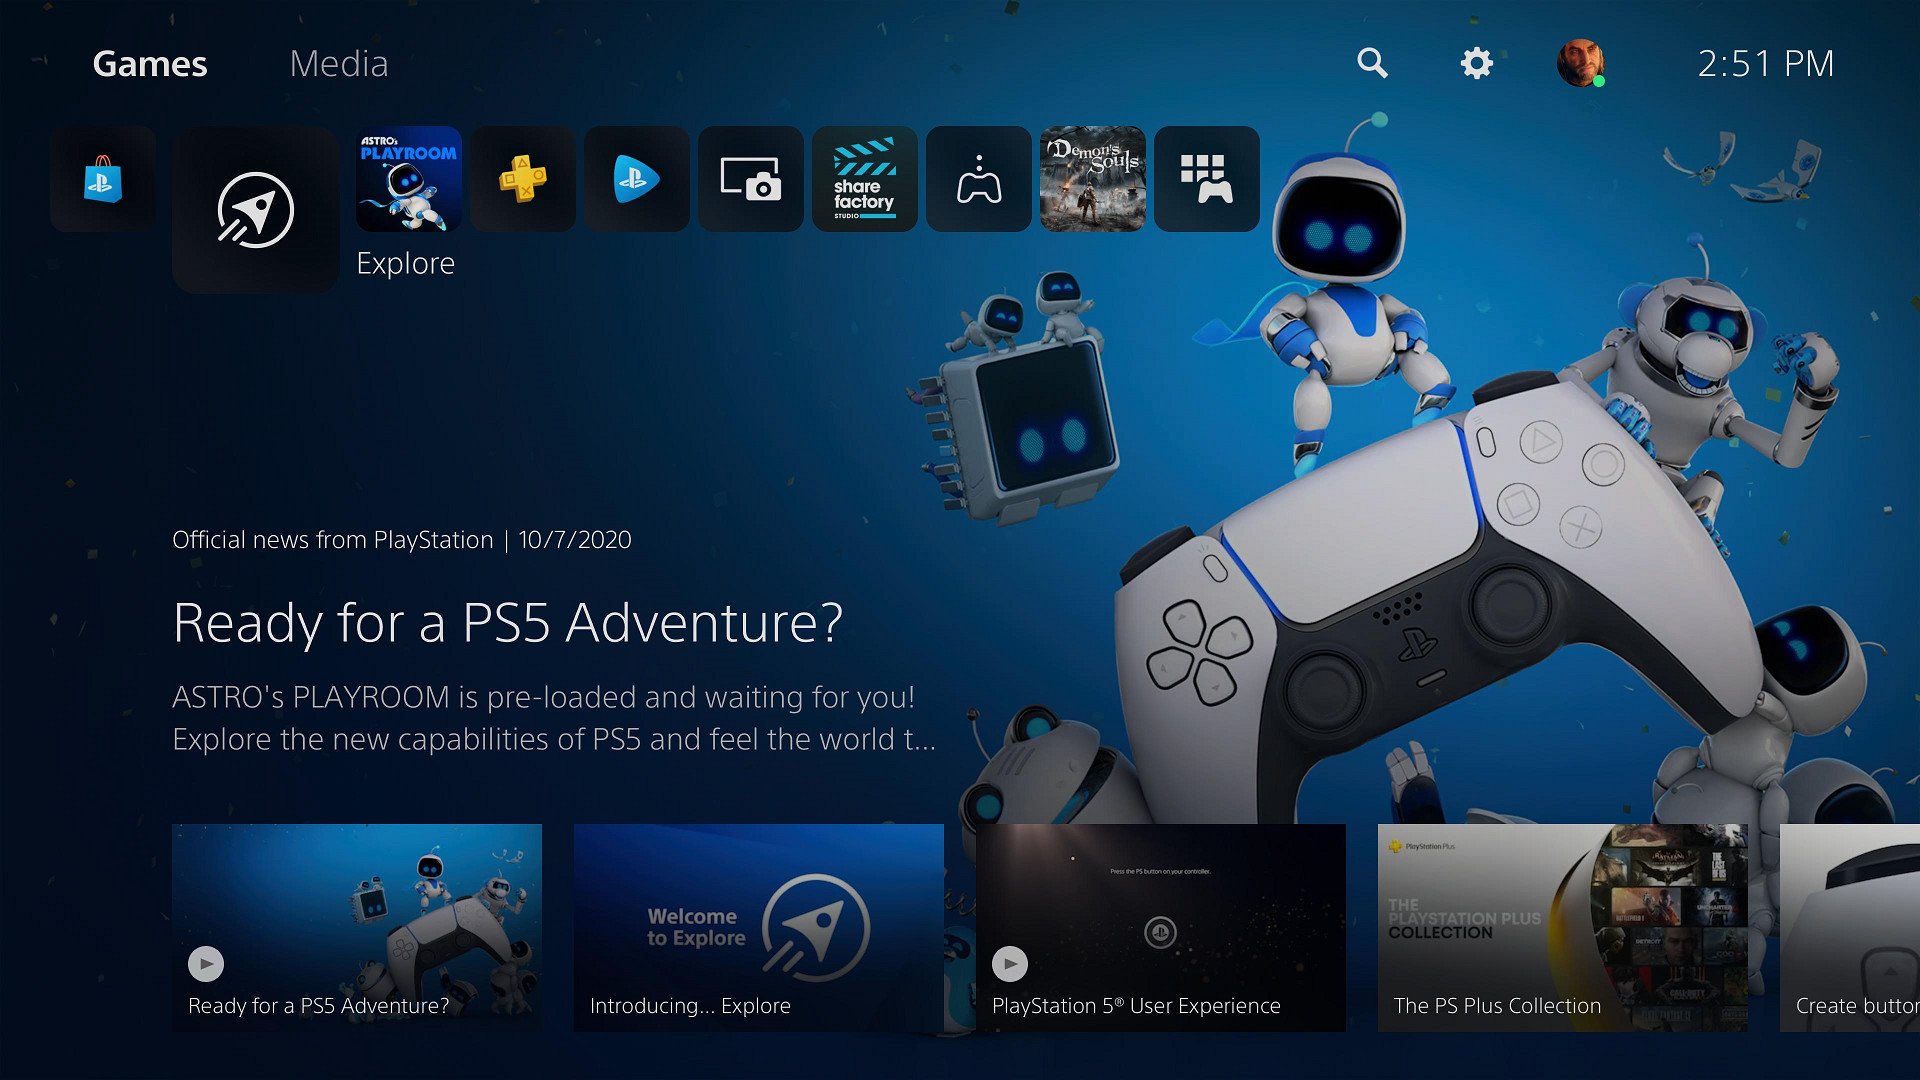 How to change the theme of your PS5 home screen